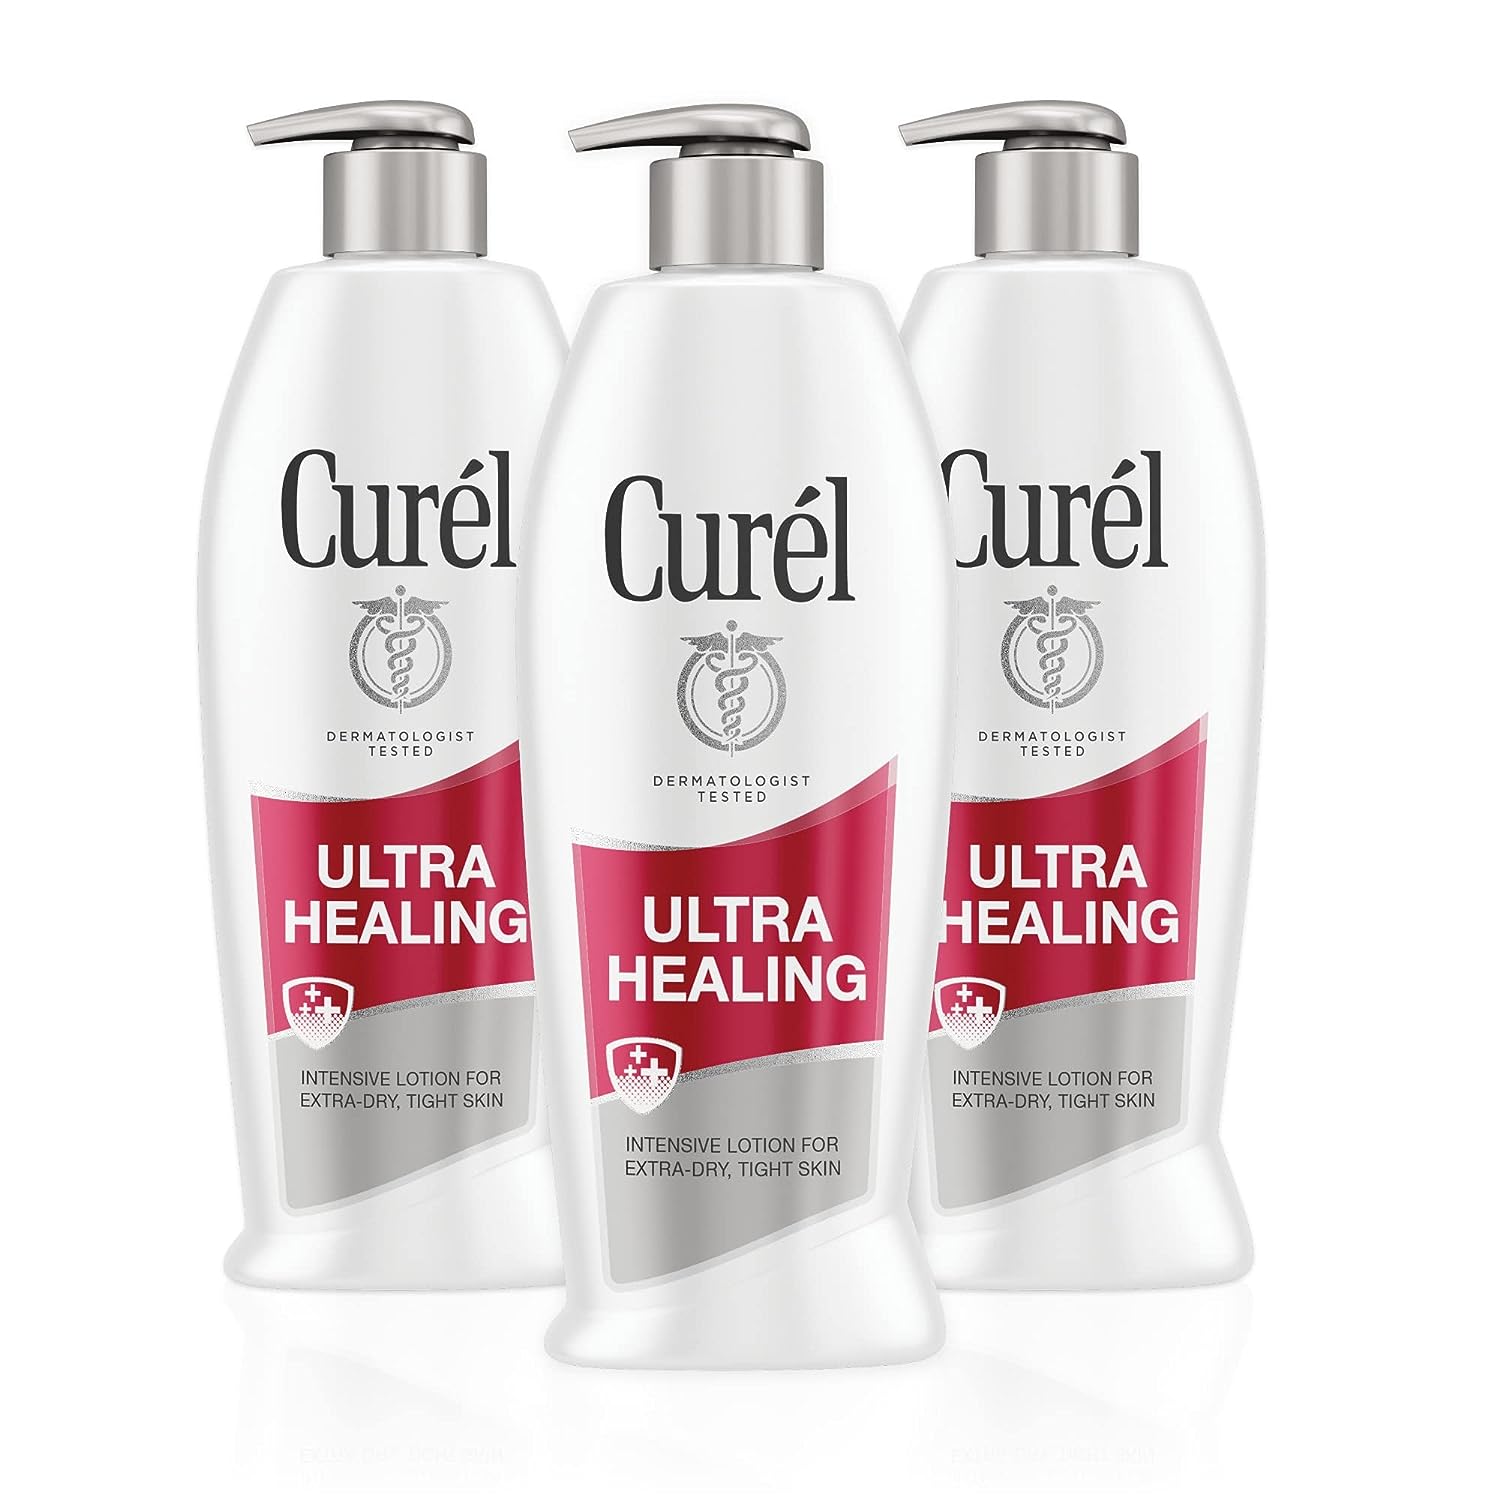 Curél Ultra Healing Hand and Body Lotion, Dry Skin Moisturizer with Advanced Ceramide Complex and Extra-strength Hydrating Agents, for Extra-Dry, Tight Skin, 13 Ounce (3 Pack)